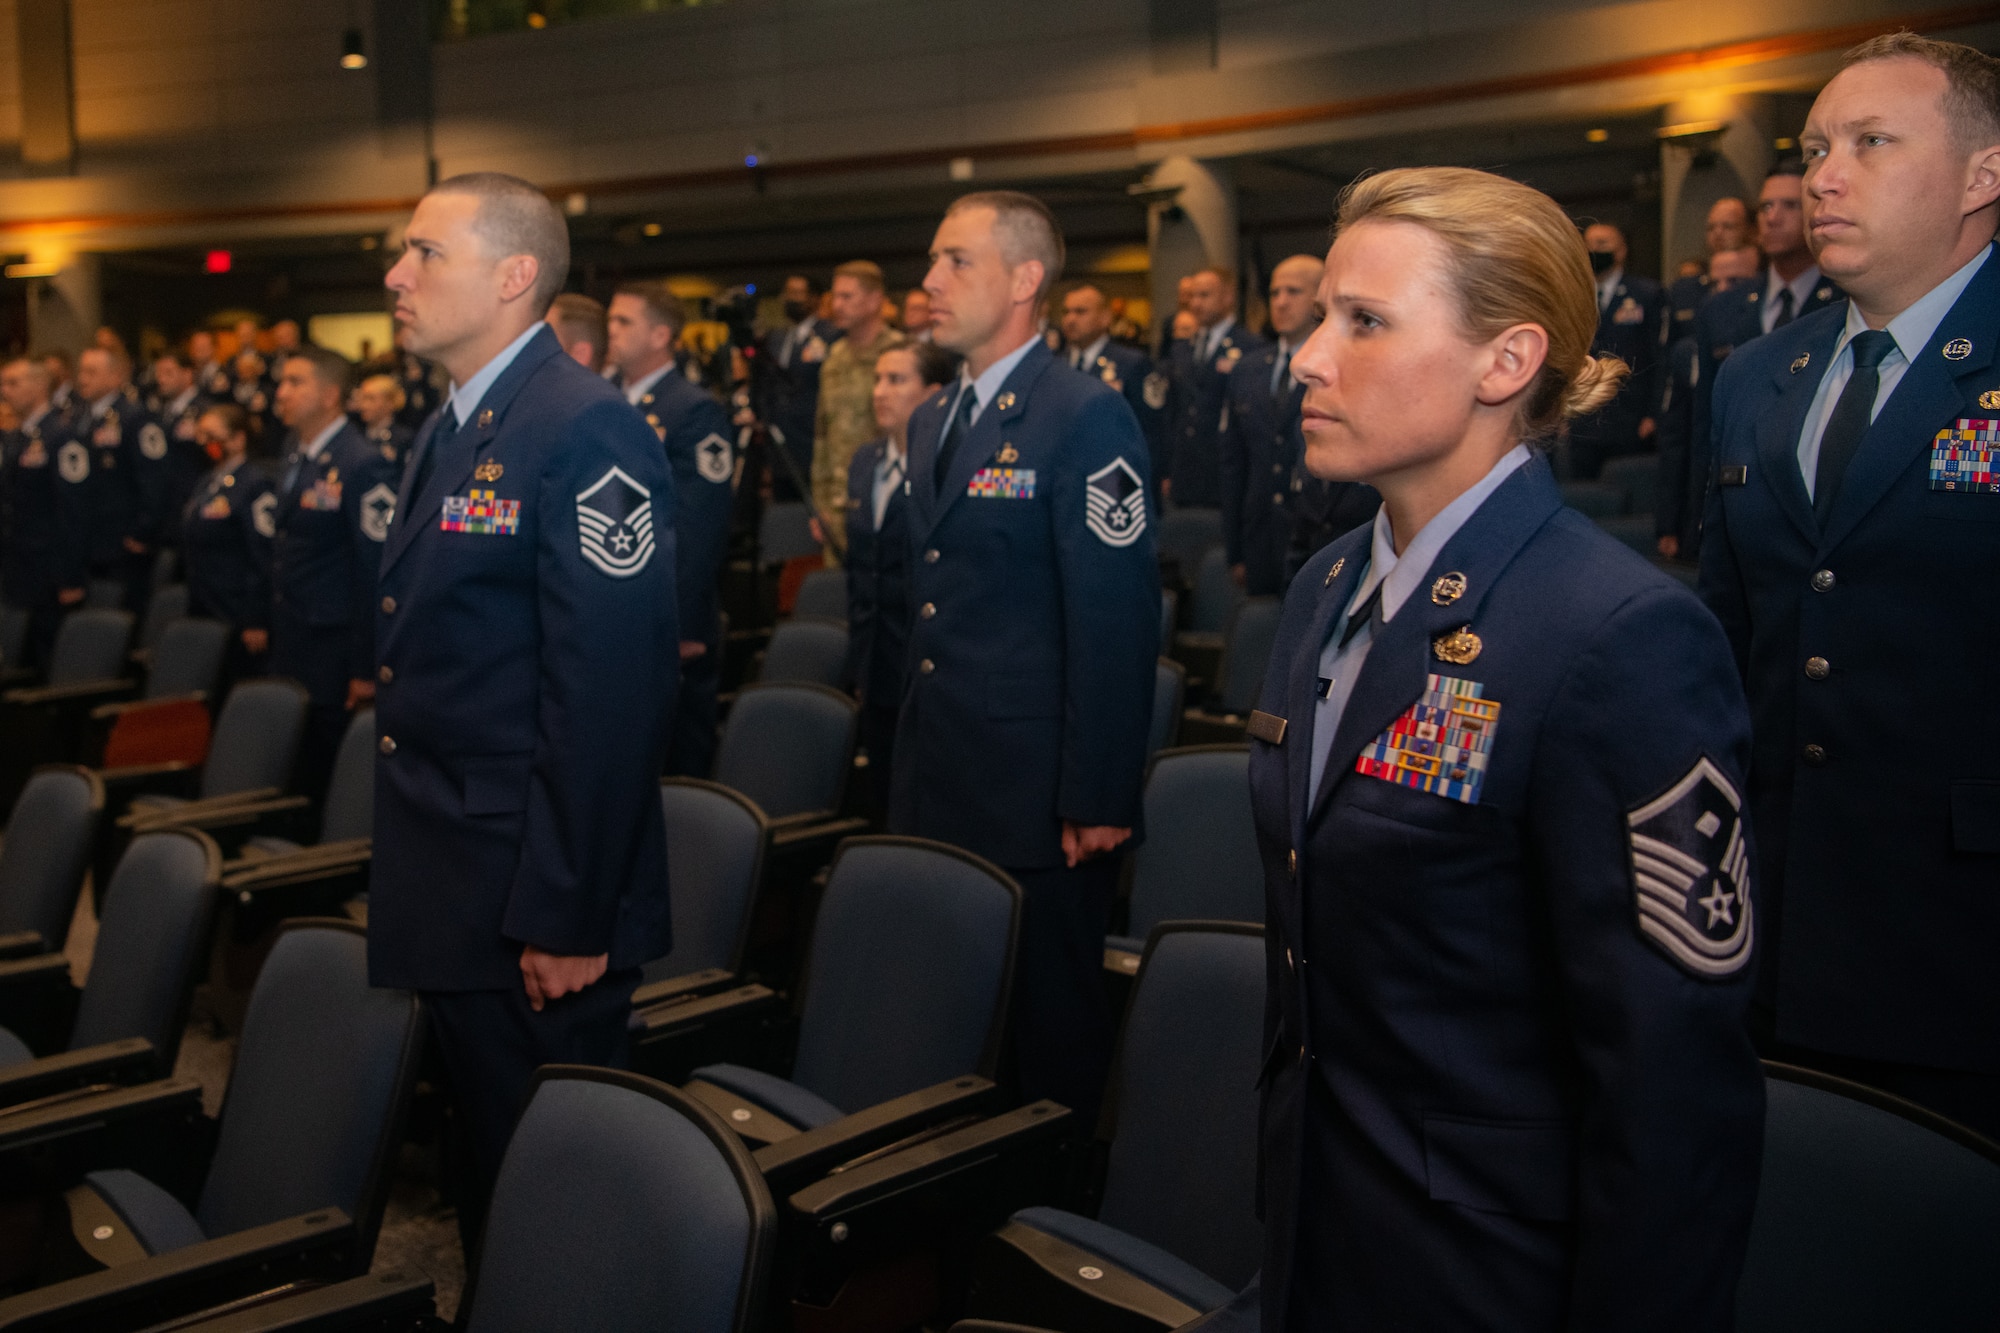 Graduates of Class 21-E stand for the arrival of the official party at a graduation ceremony at the Senior Noncommissioned Officer Academy on Maxwell-Gunter Annex, Alabama, May 26, 2020. The SNCOA held its first in-person graduation ceremony since the World Health Organization declared COVID-19 a pandemic in March 2020.